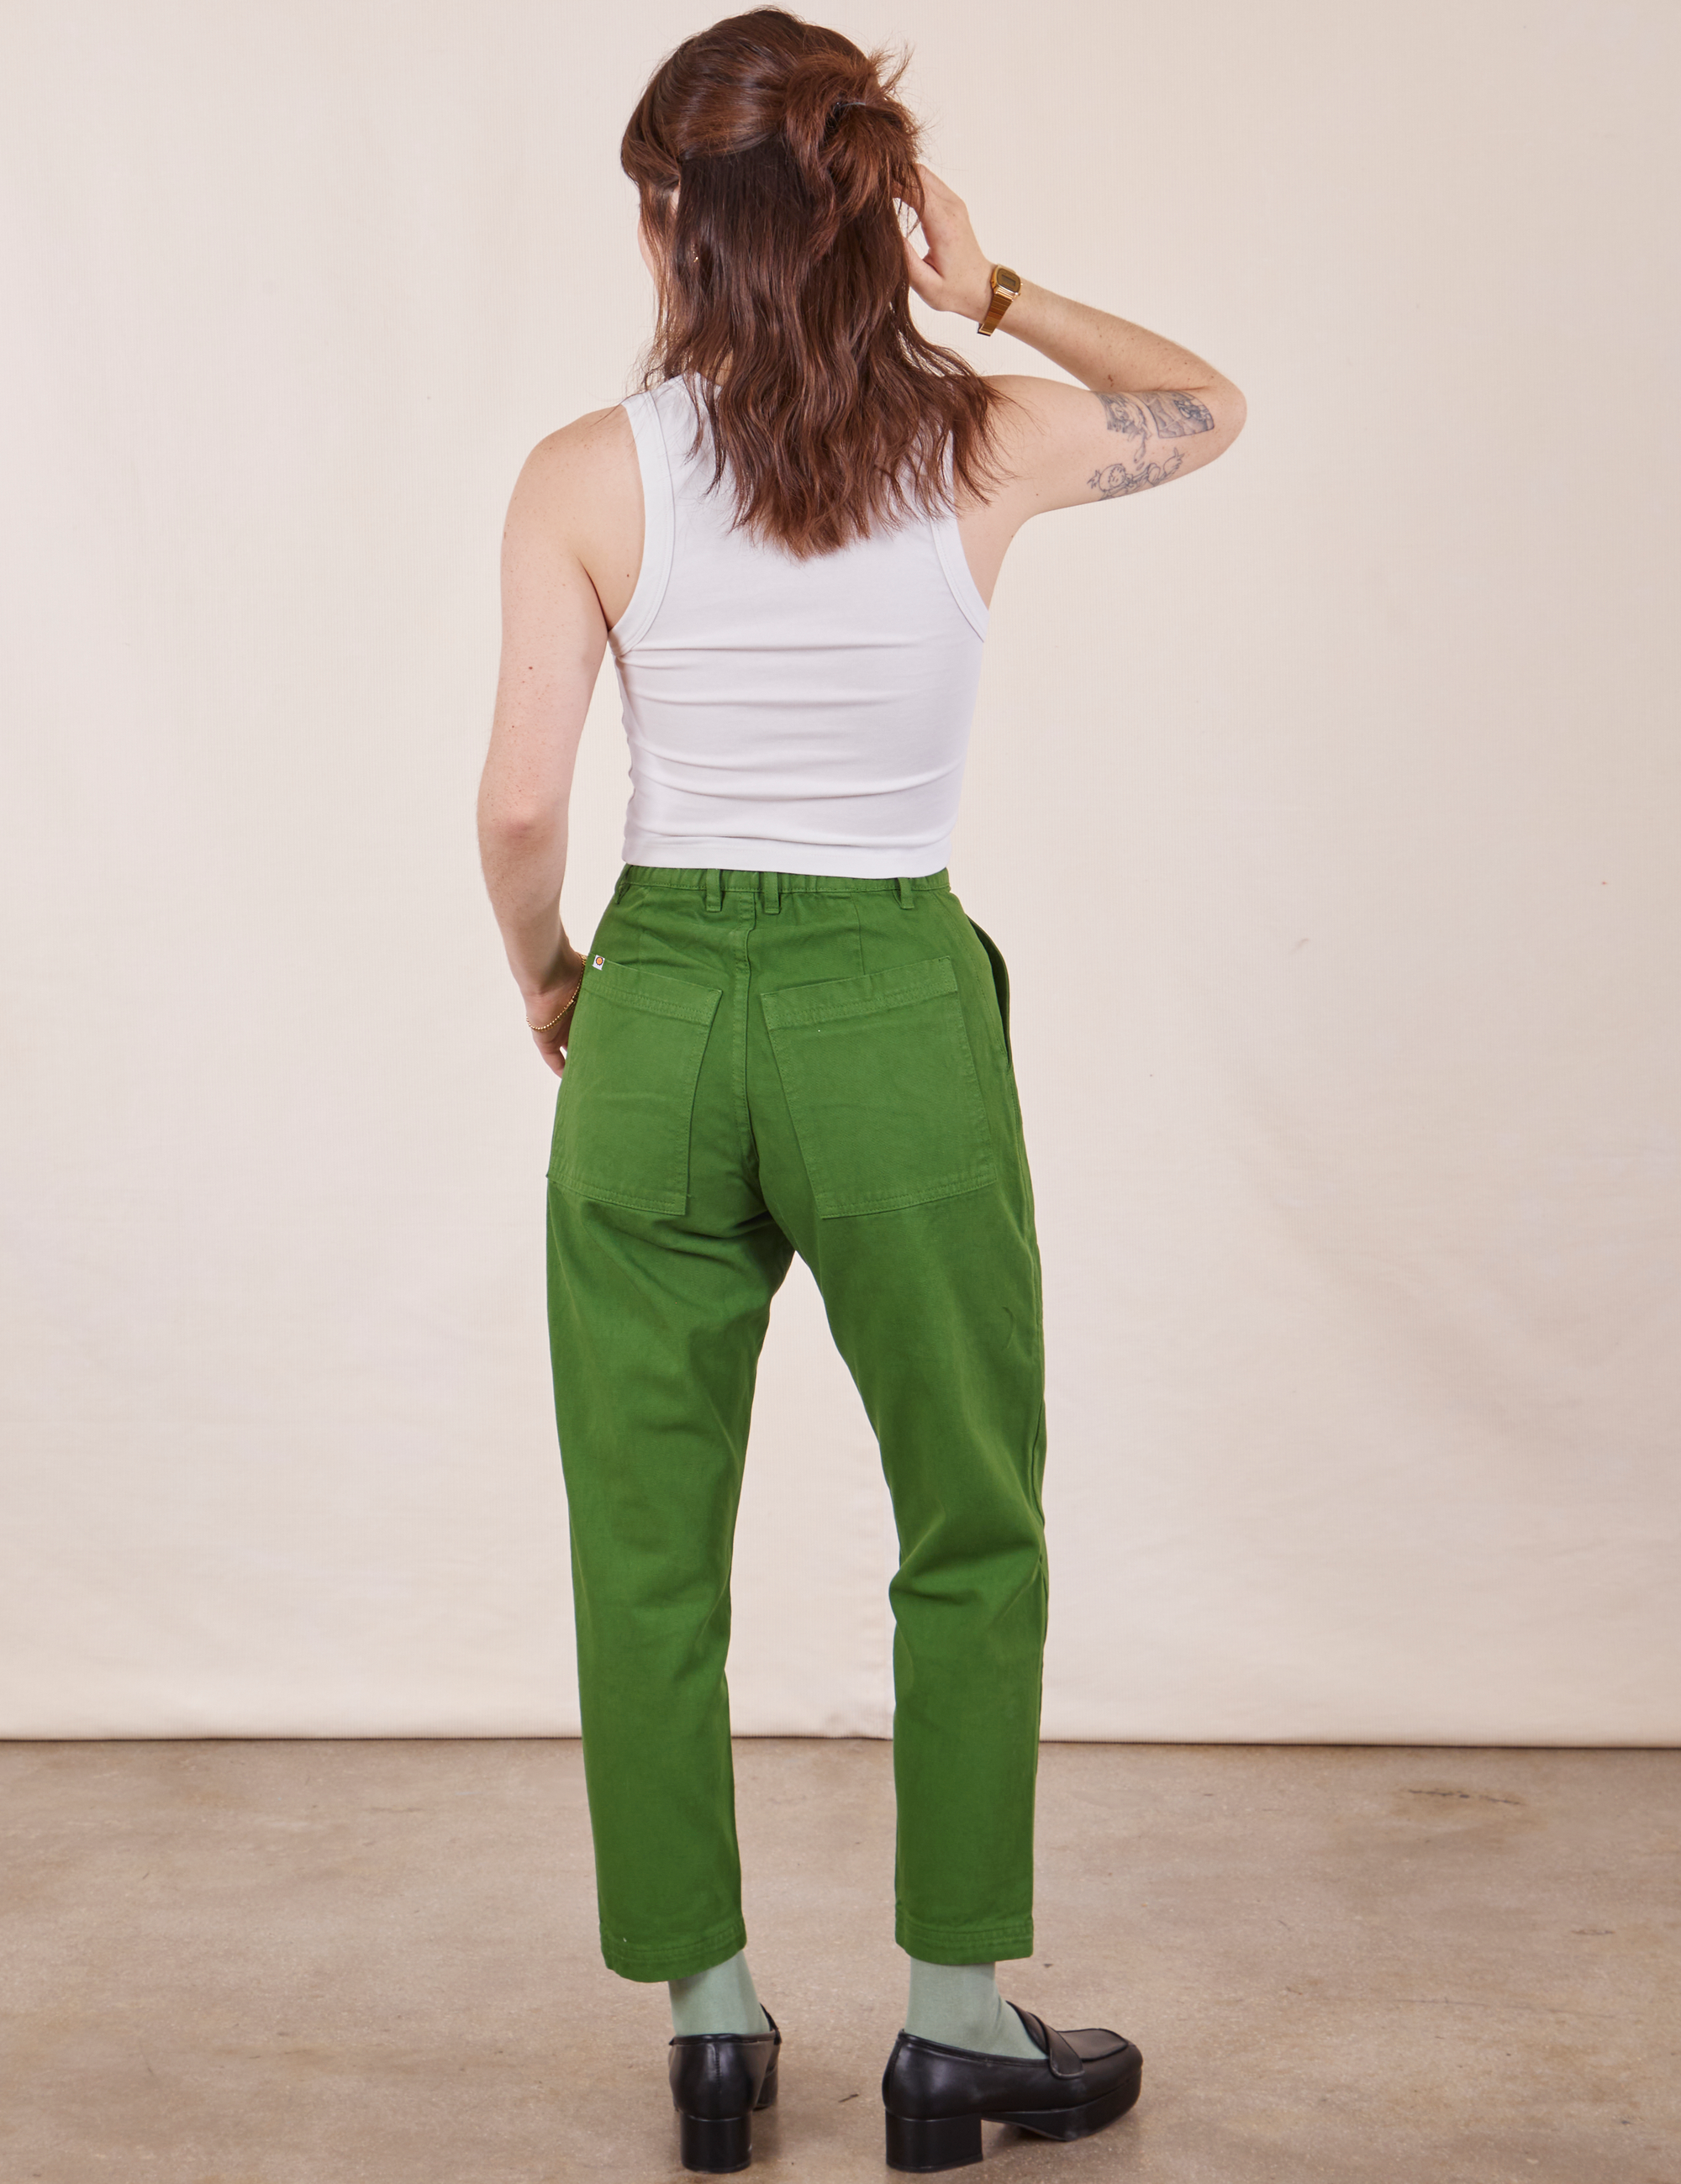 Back view of Petite Pencil Pants in Lawn Green and Cropped Tank Top in vintage tee off-white